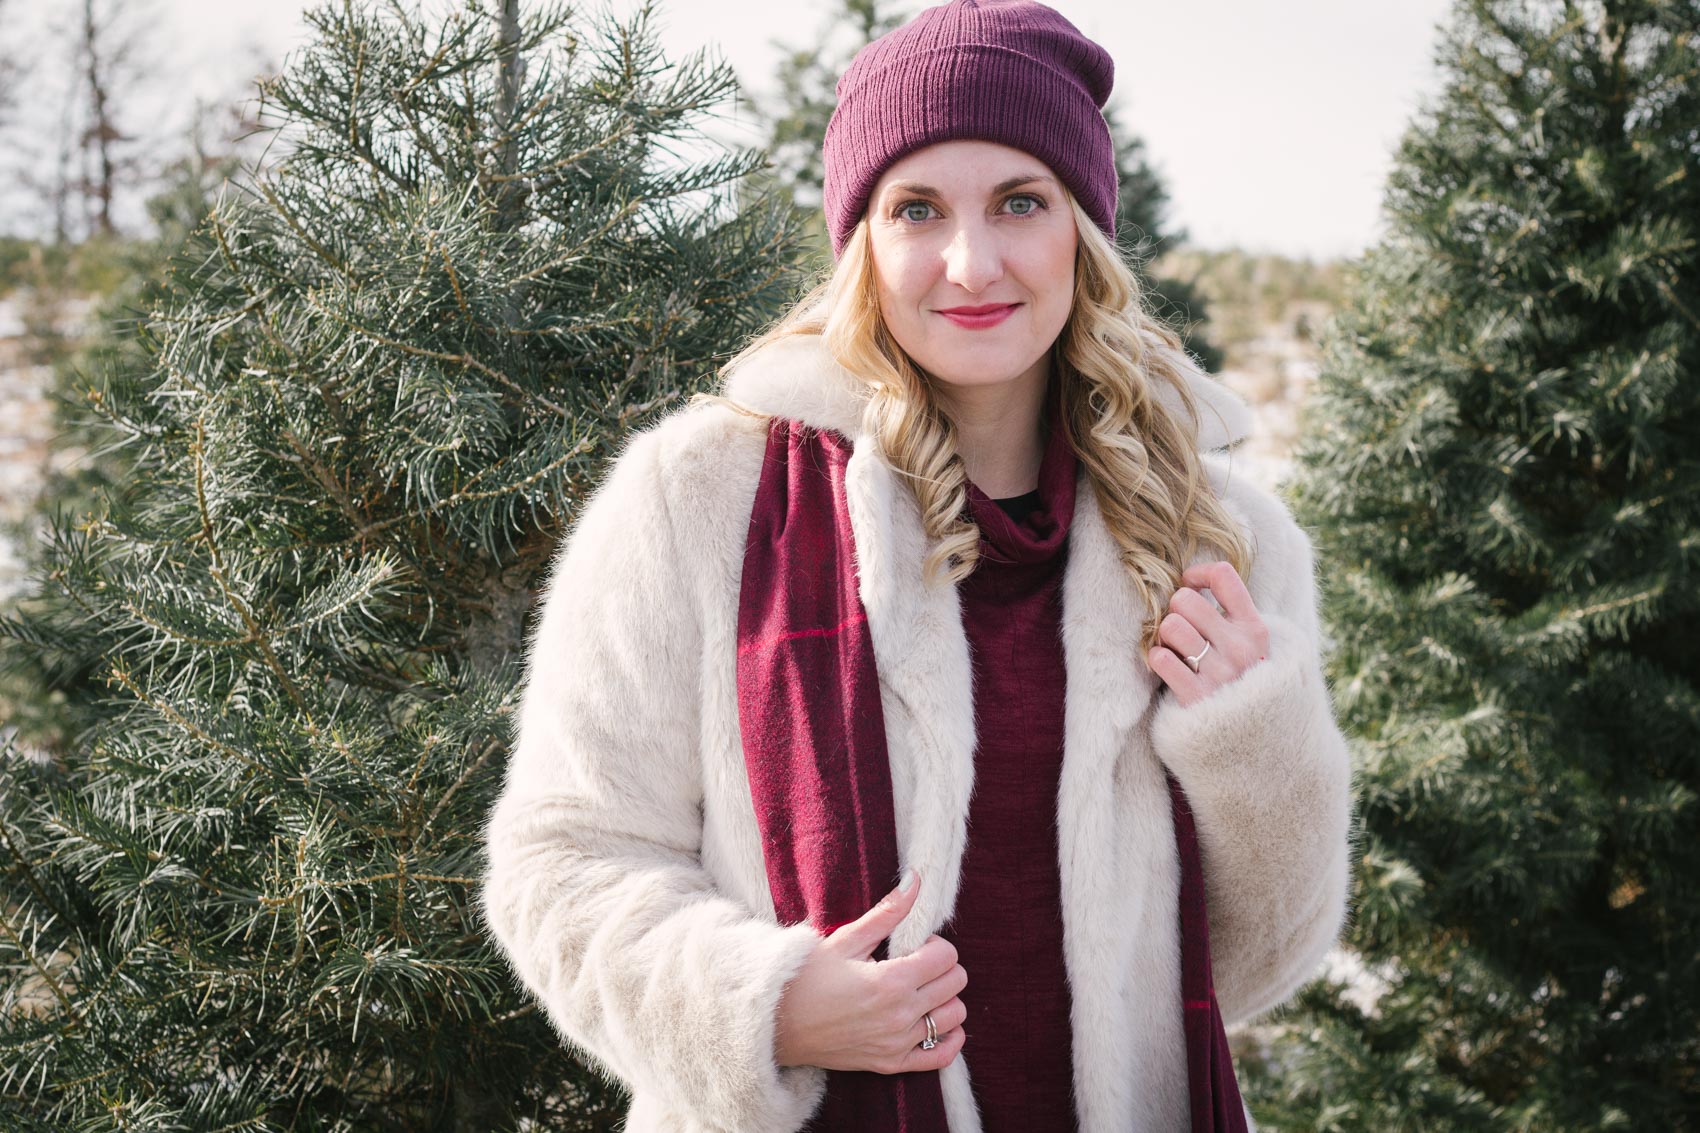 A note on holiday traditions and traditions along with a $50 luxurious faux fur coat outfit. Plus, a few more fur coats for women that are all under $200!